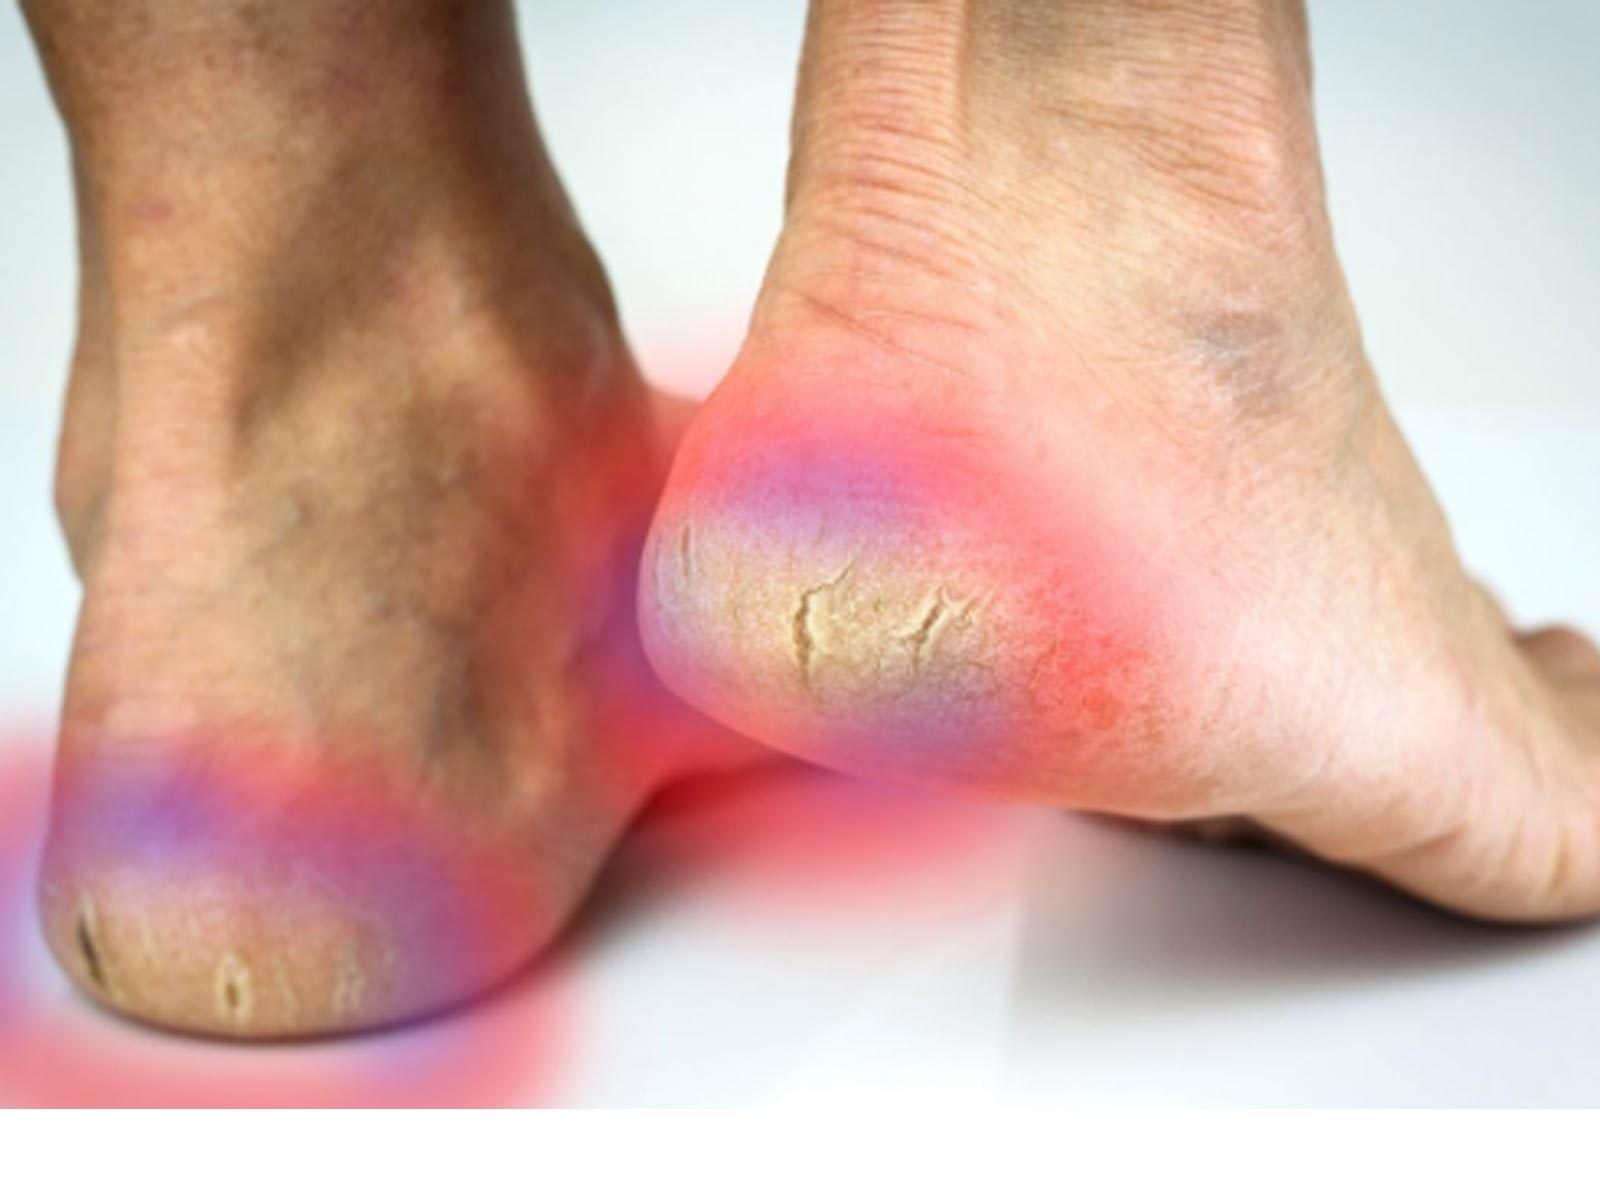 Cracked Heels and Heel Fissures | Causes and treatment options |  MyFootShop.com